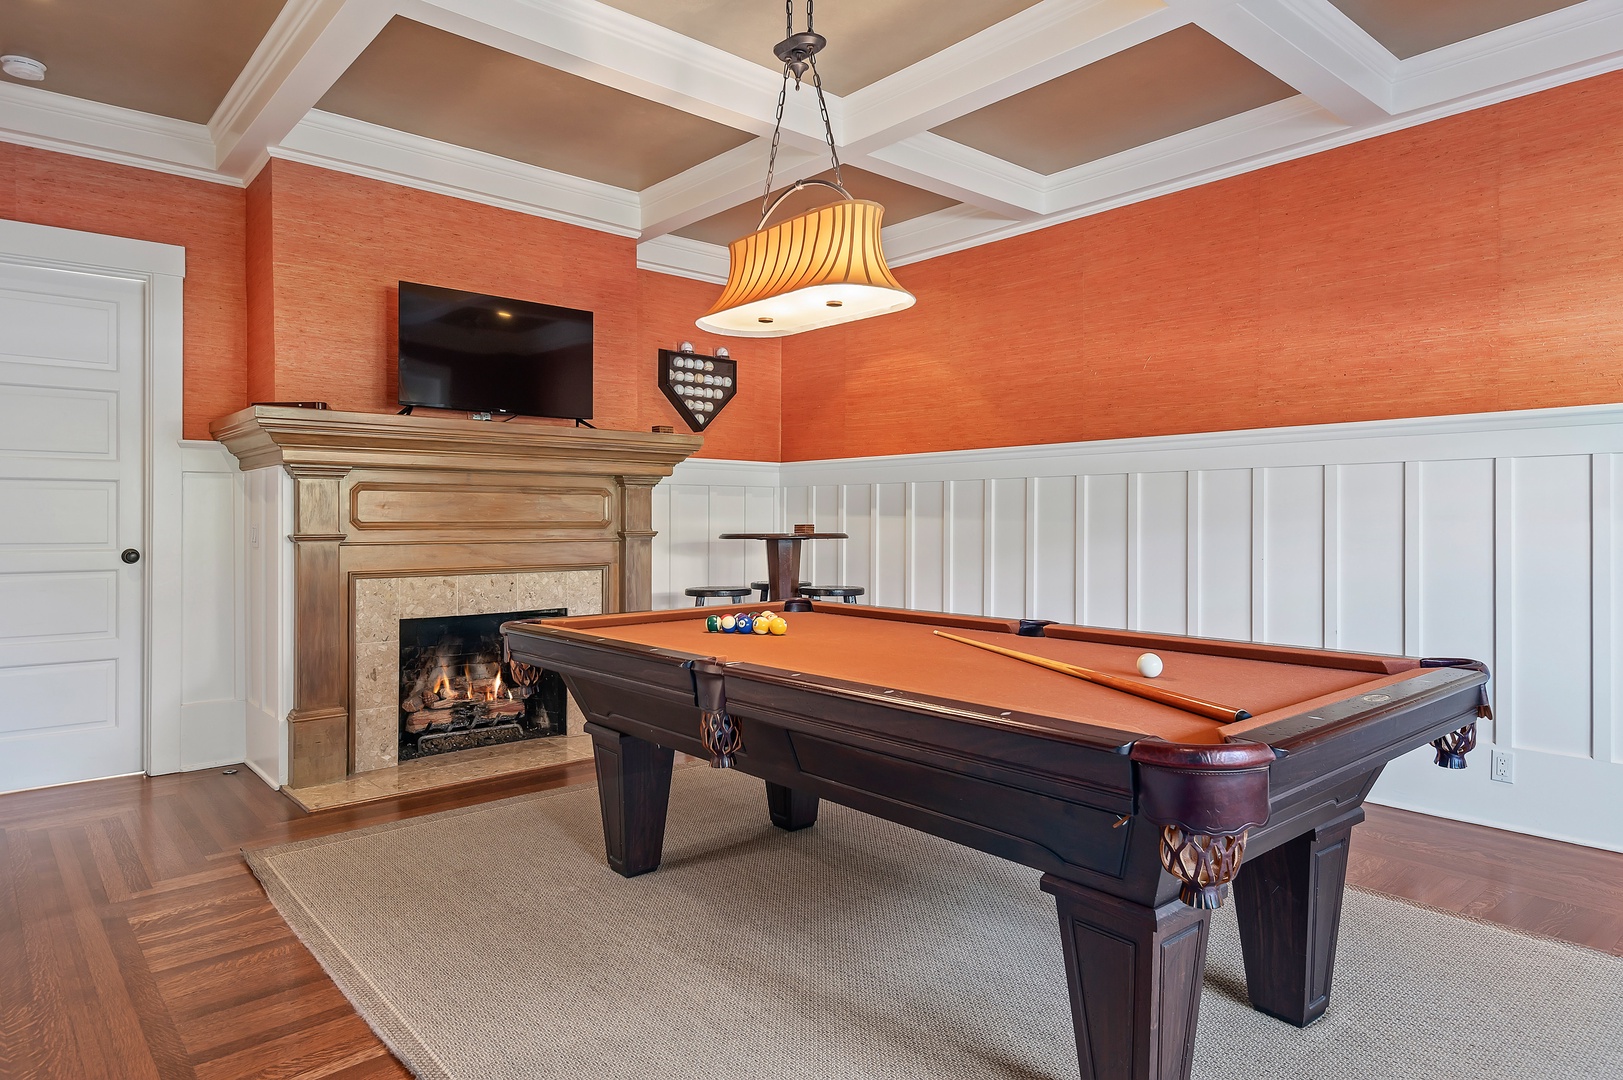 Delight in a spirited game of pool within the well-appointed game room.